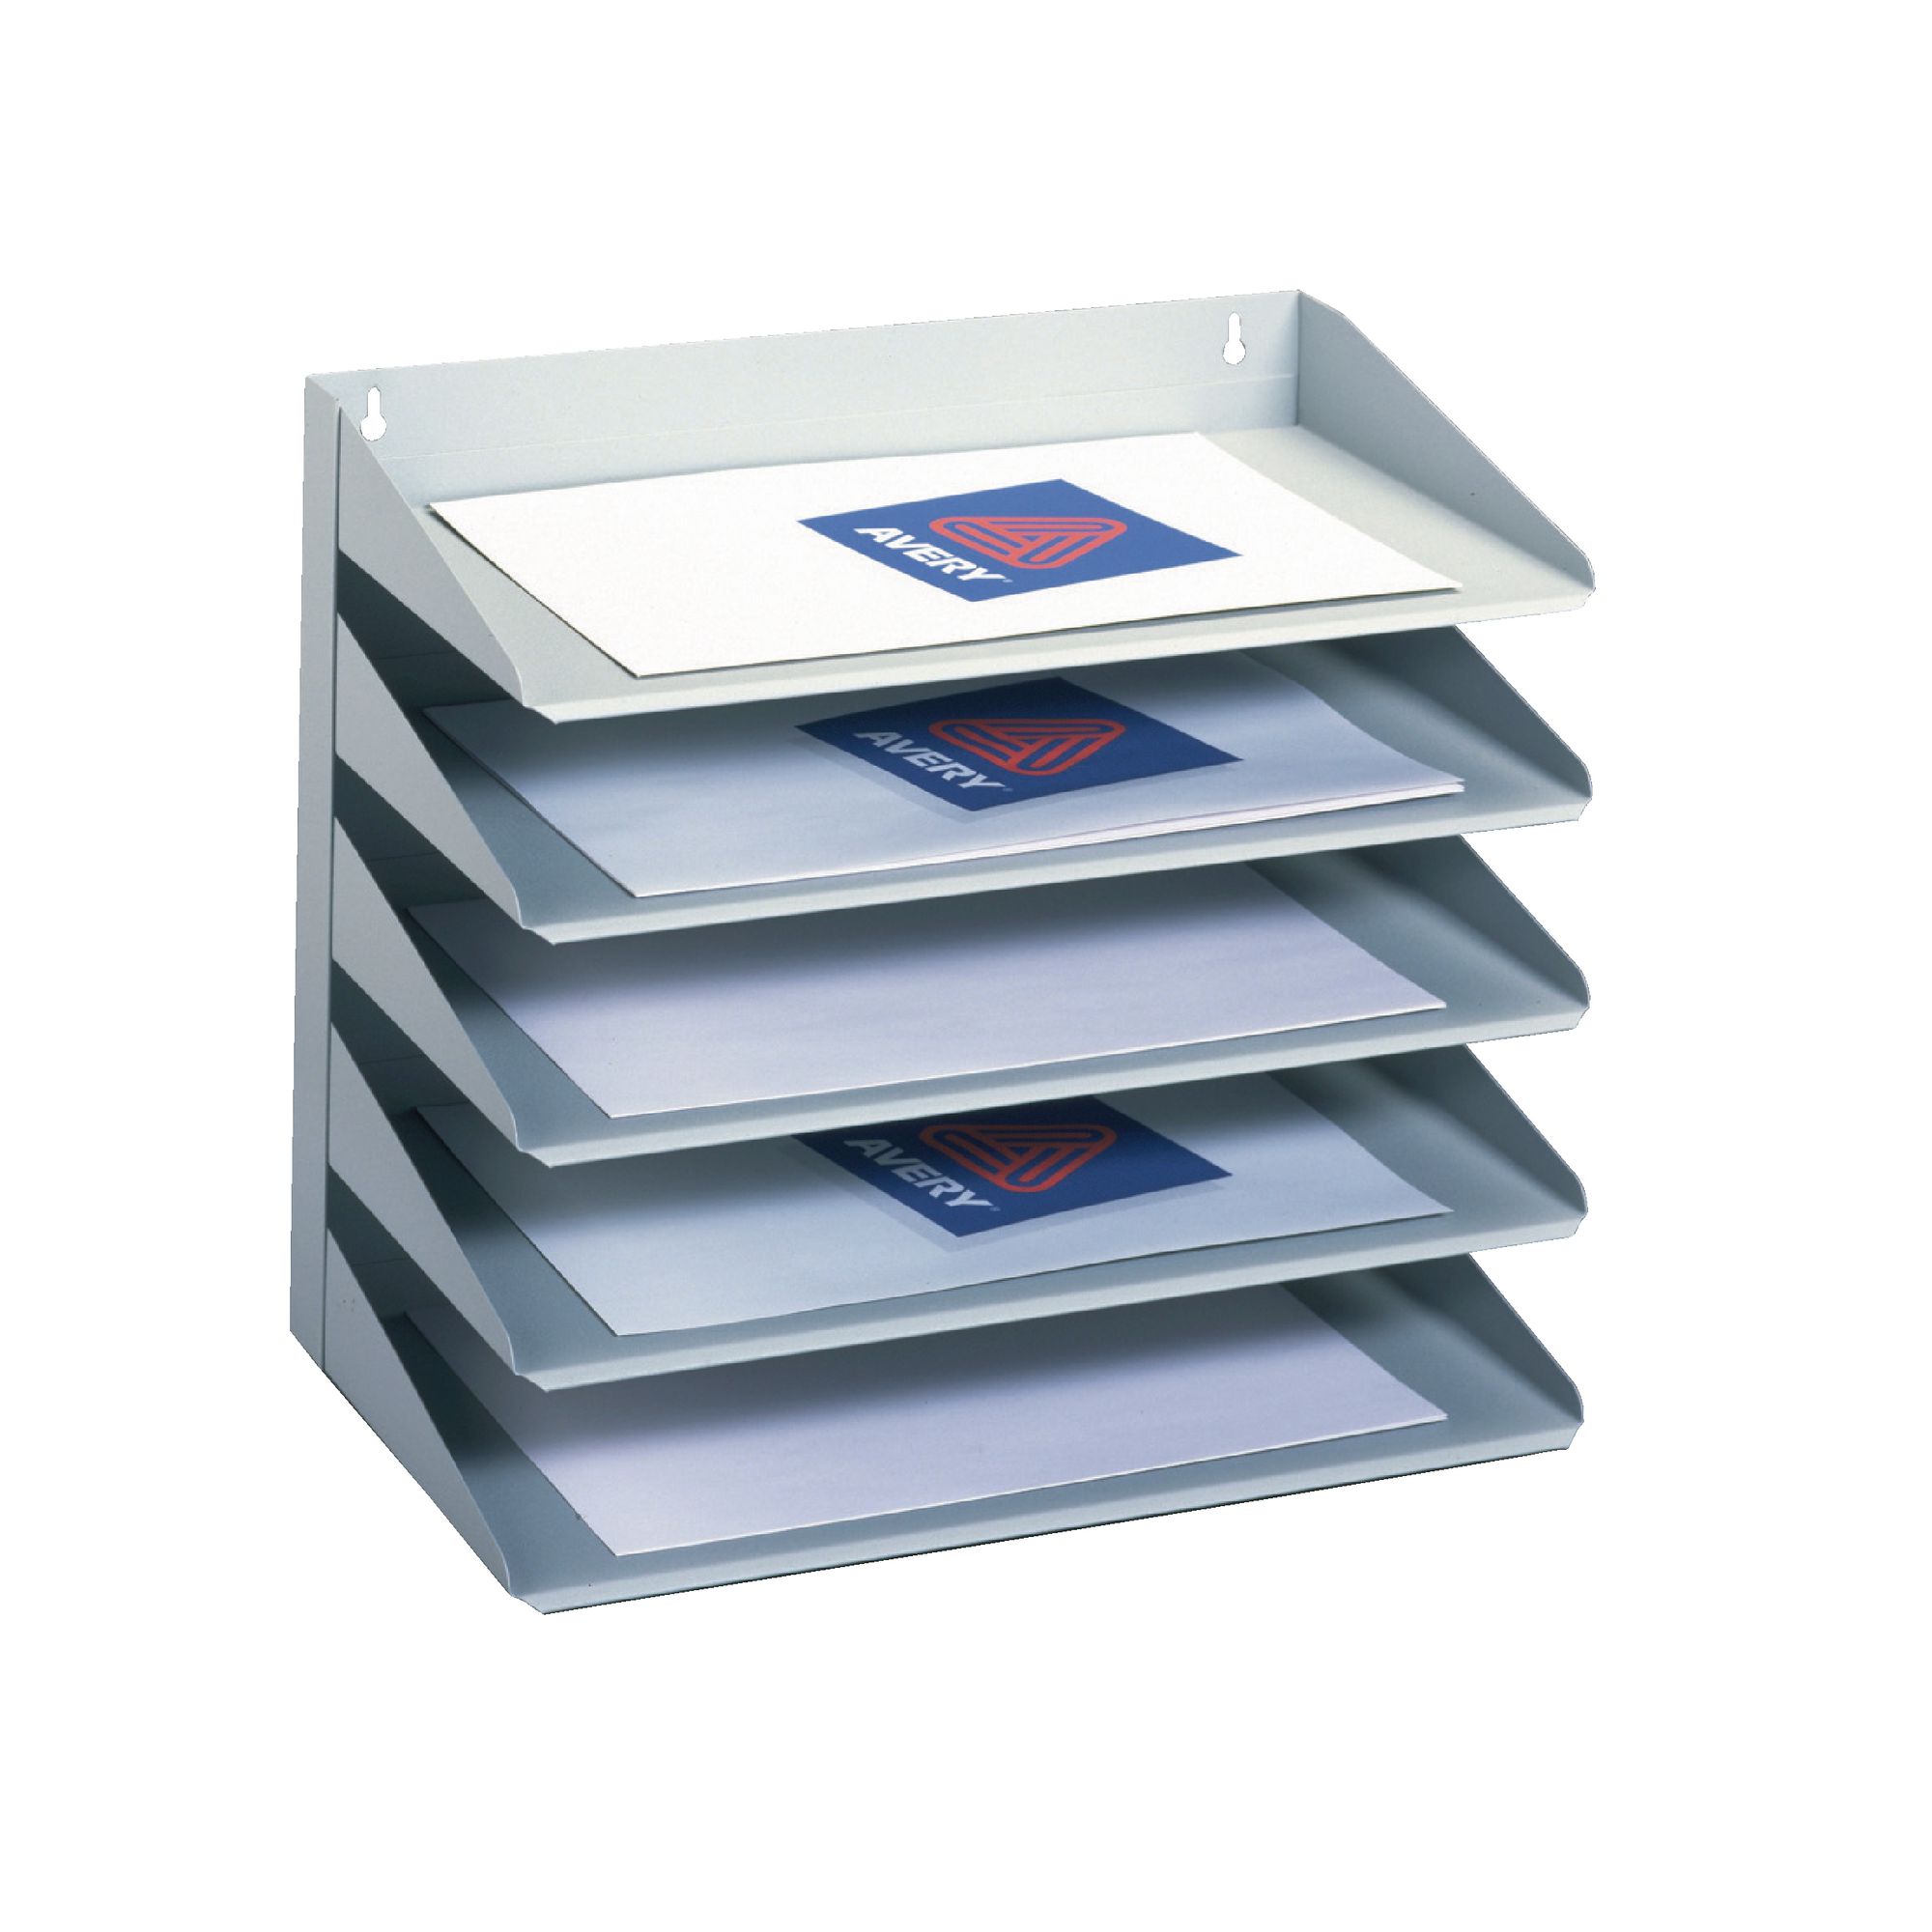 Letter Trays